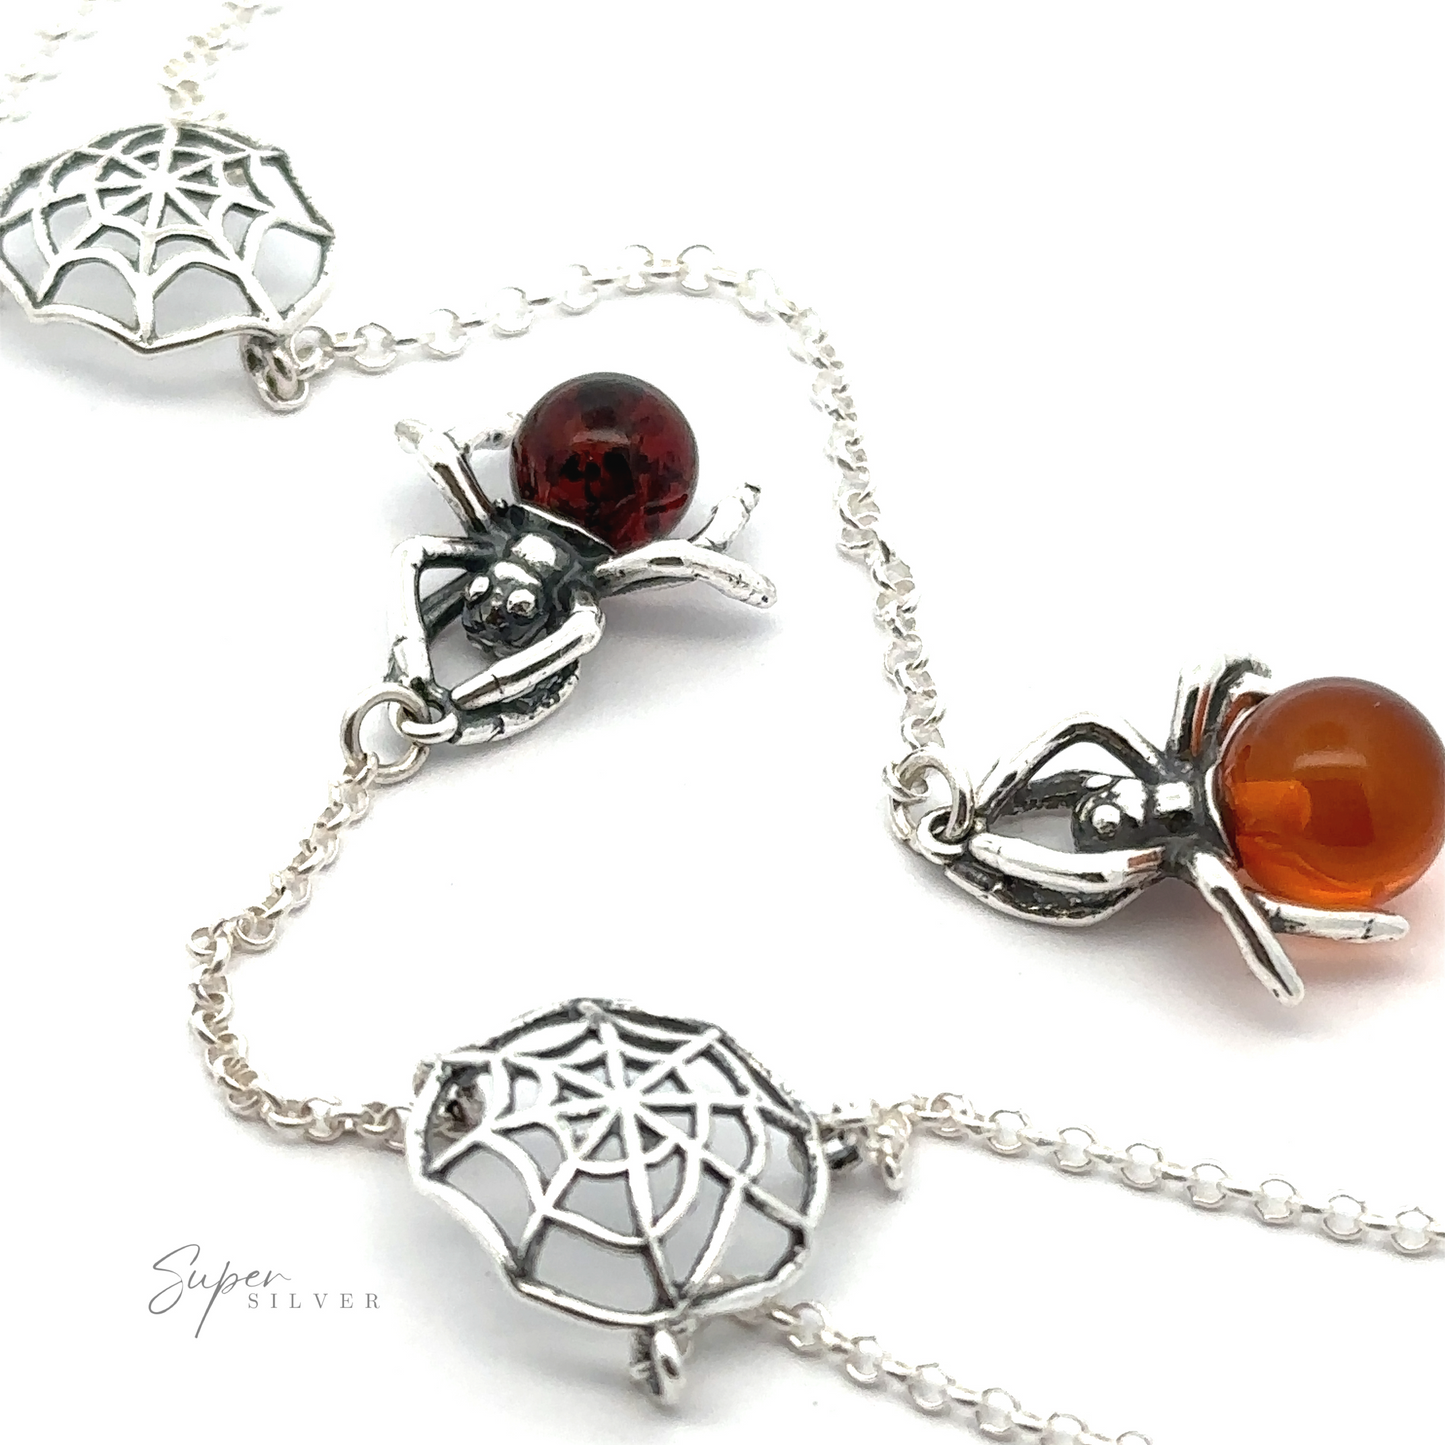 A close-up of a Baltic Amber Spider Necklace featuring spider and spider web designs with red and orange gemstone accents, exuding a witchy vibe. The background is white.